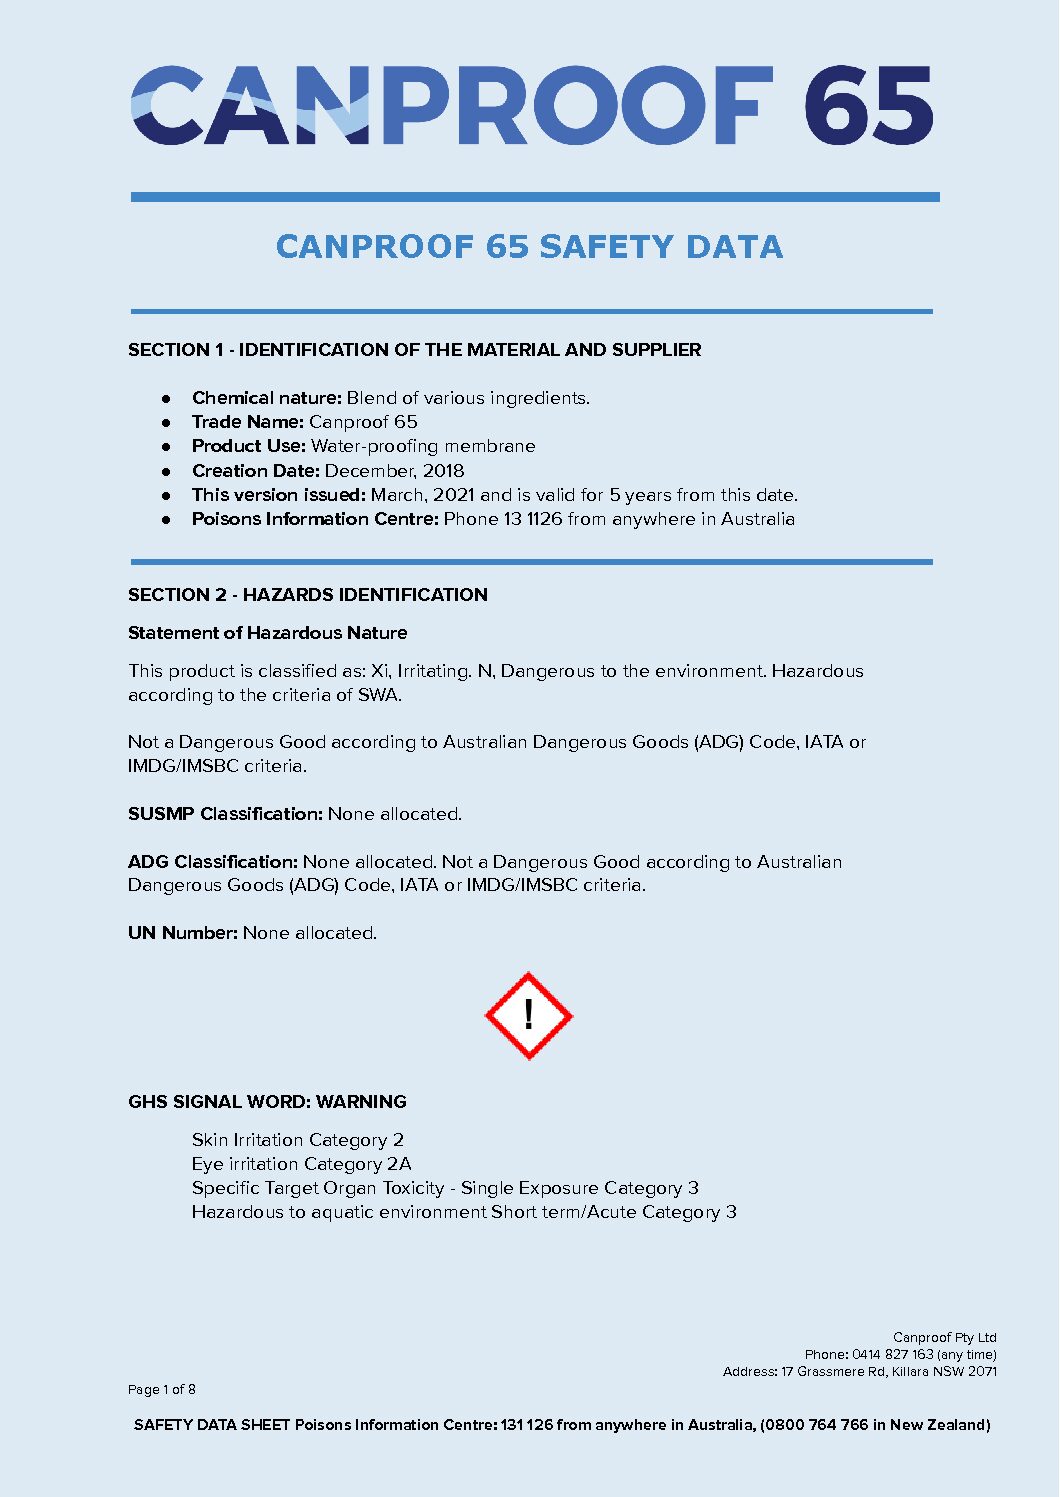 Canproof 65 SDS